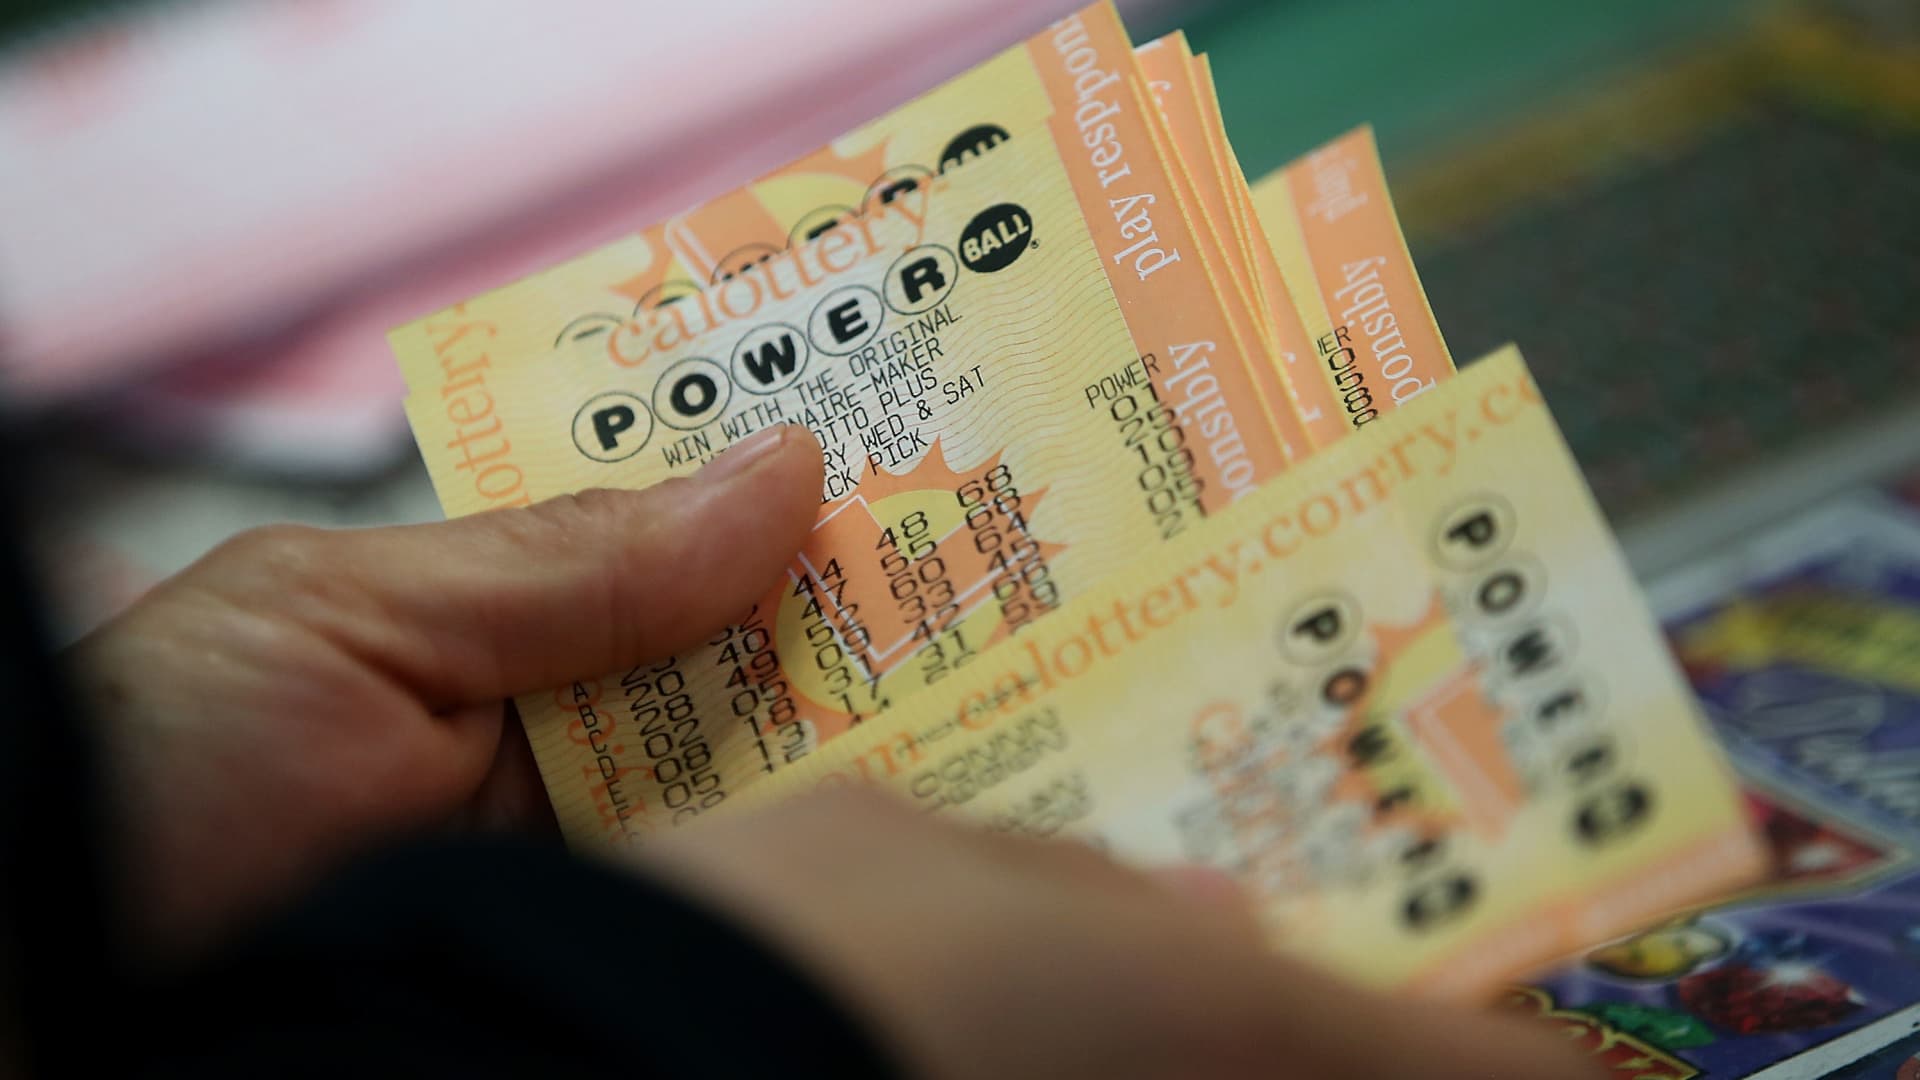 Winning ticket for Powerball's $366.7 million jackpot sold in Vermont. Here's the tax bite for the winner